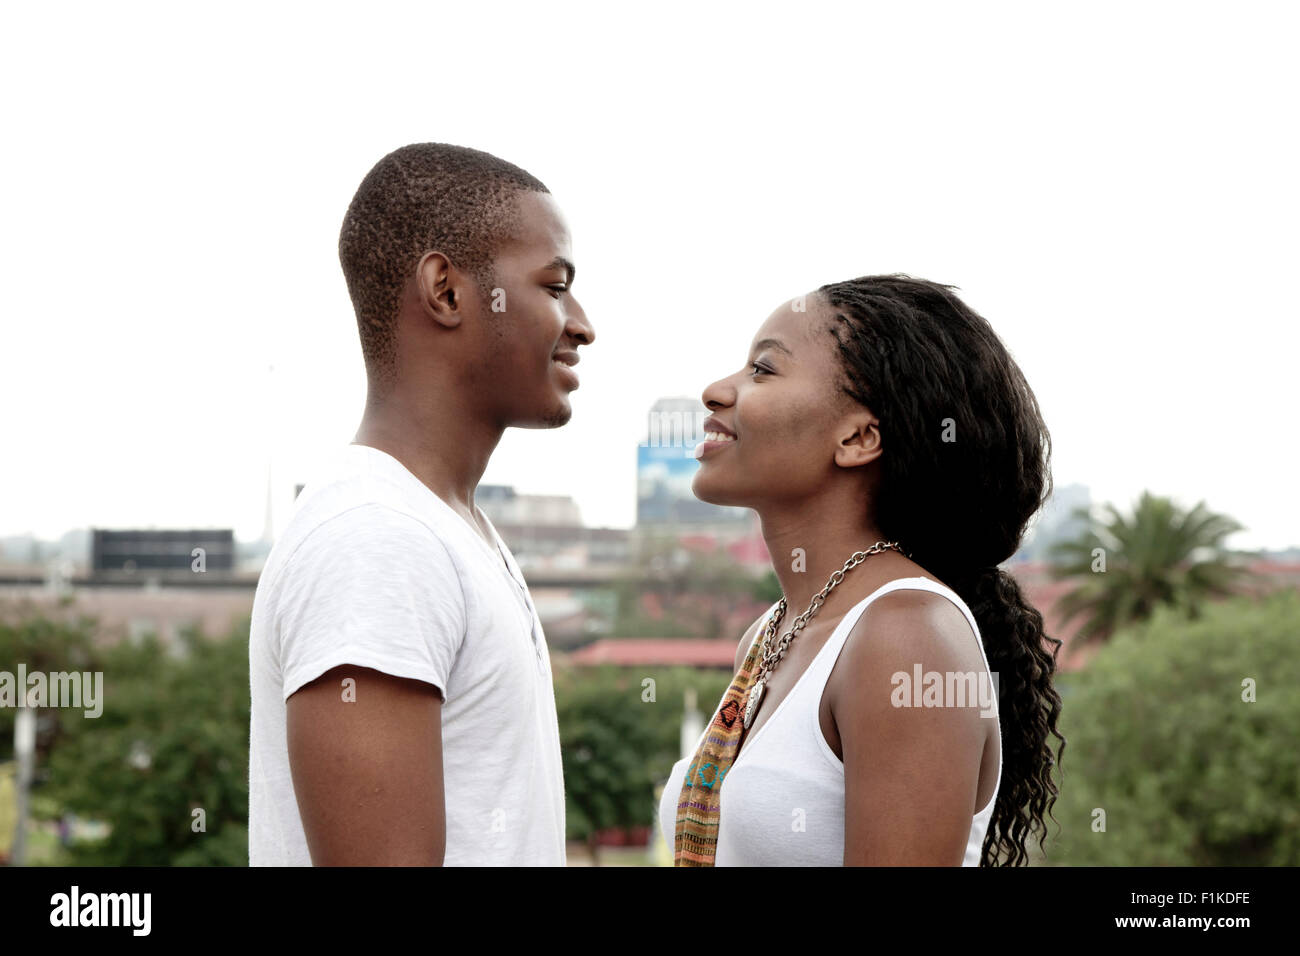 Young African couple standing together with a Johannesburg city scene in the background Stock Photo